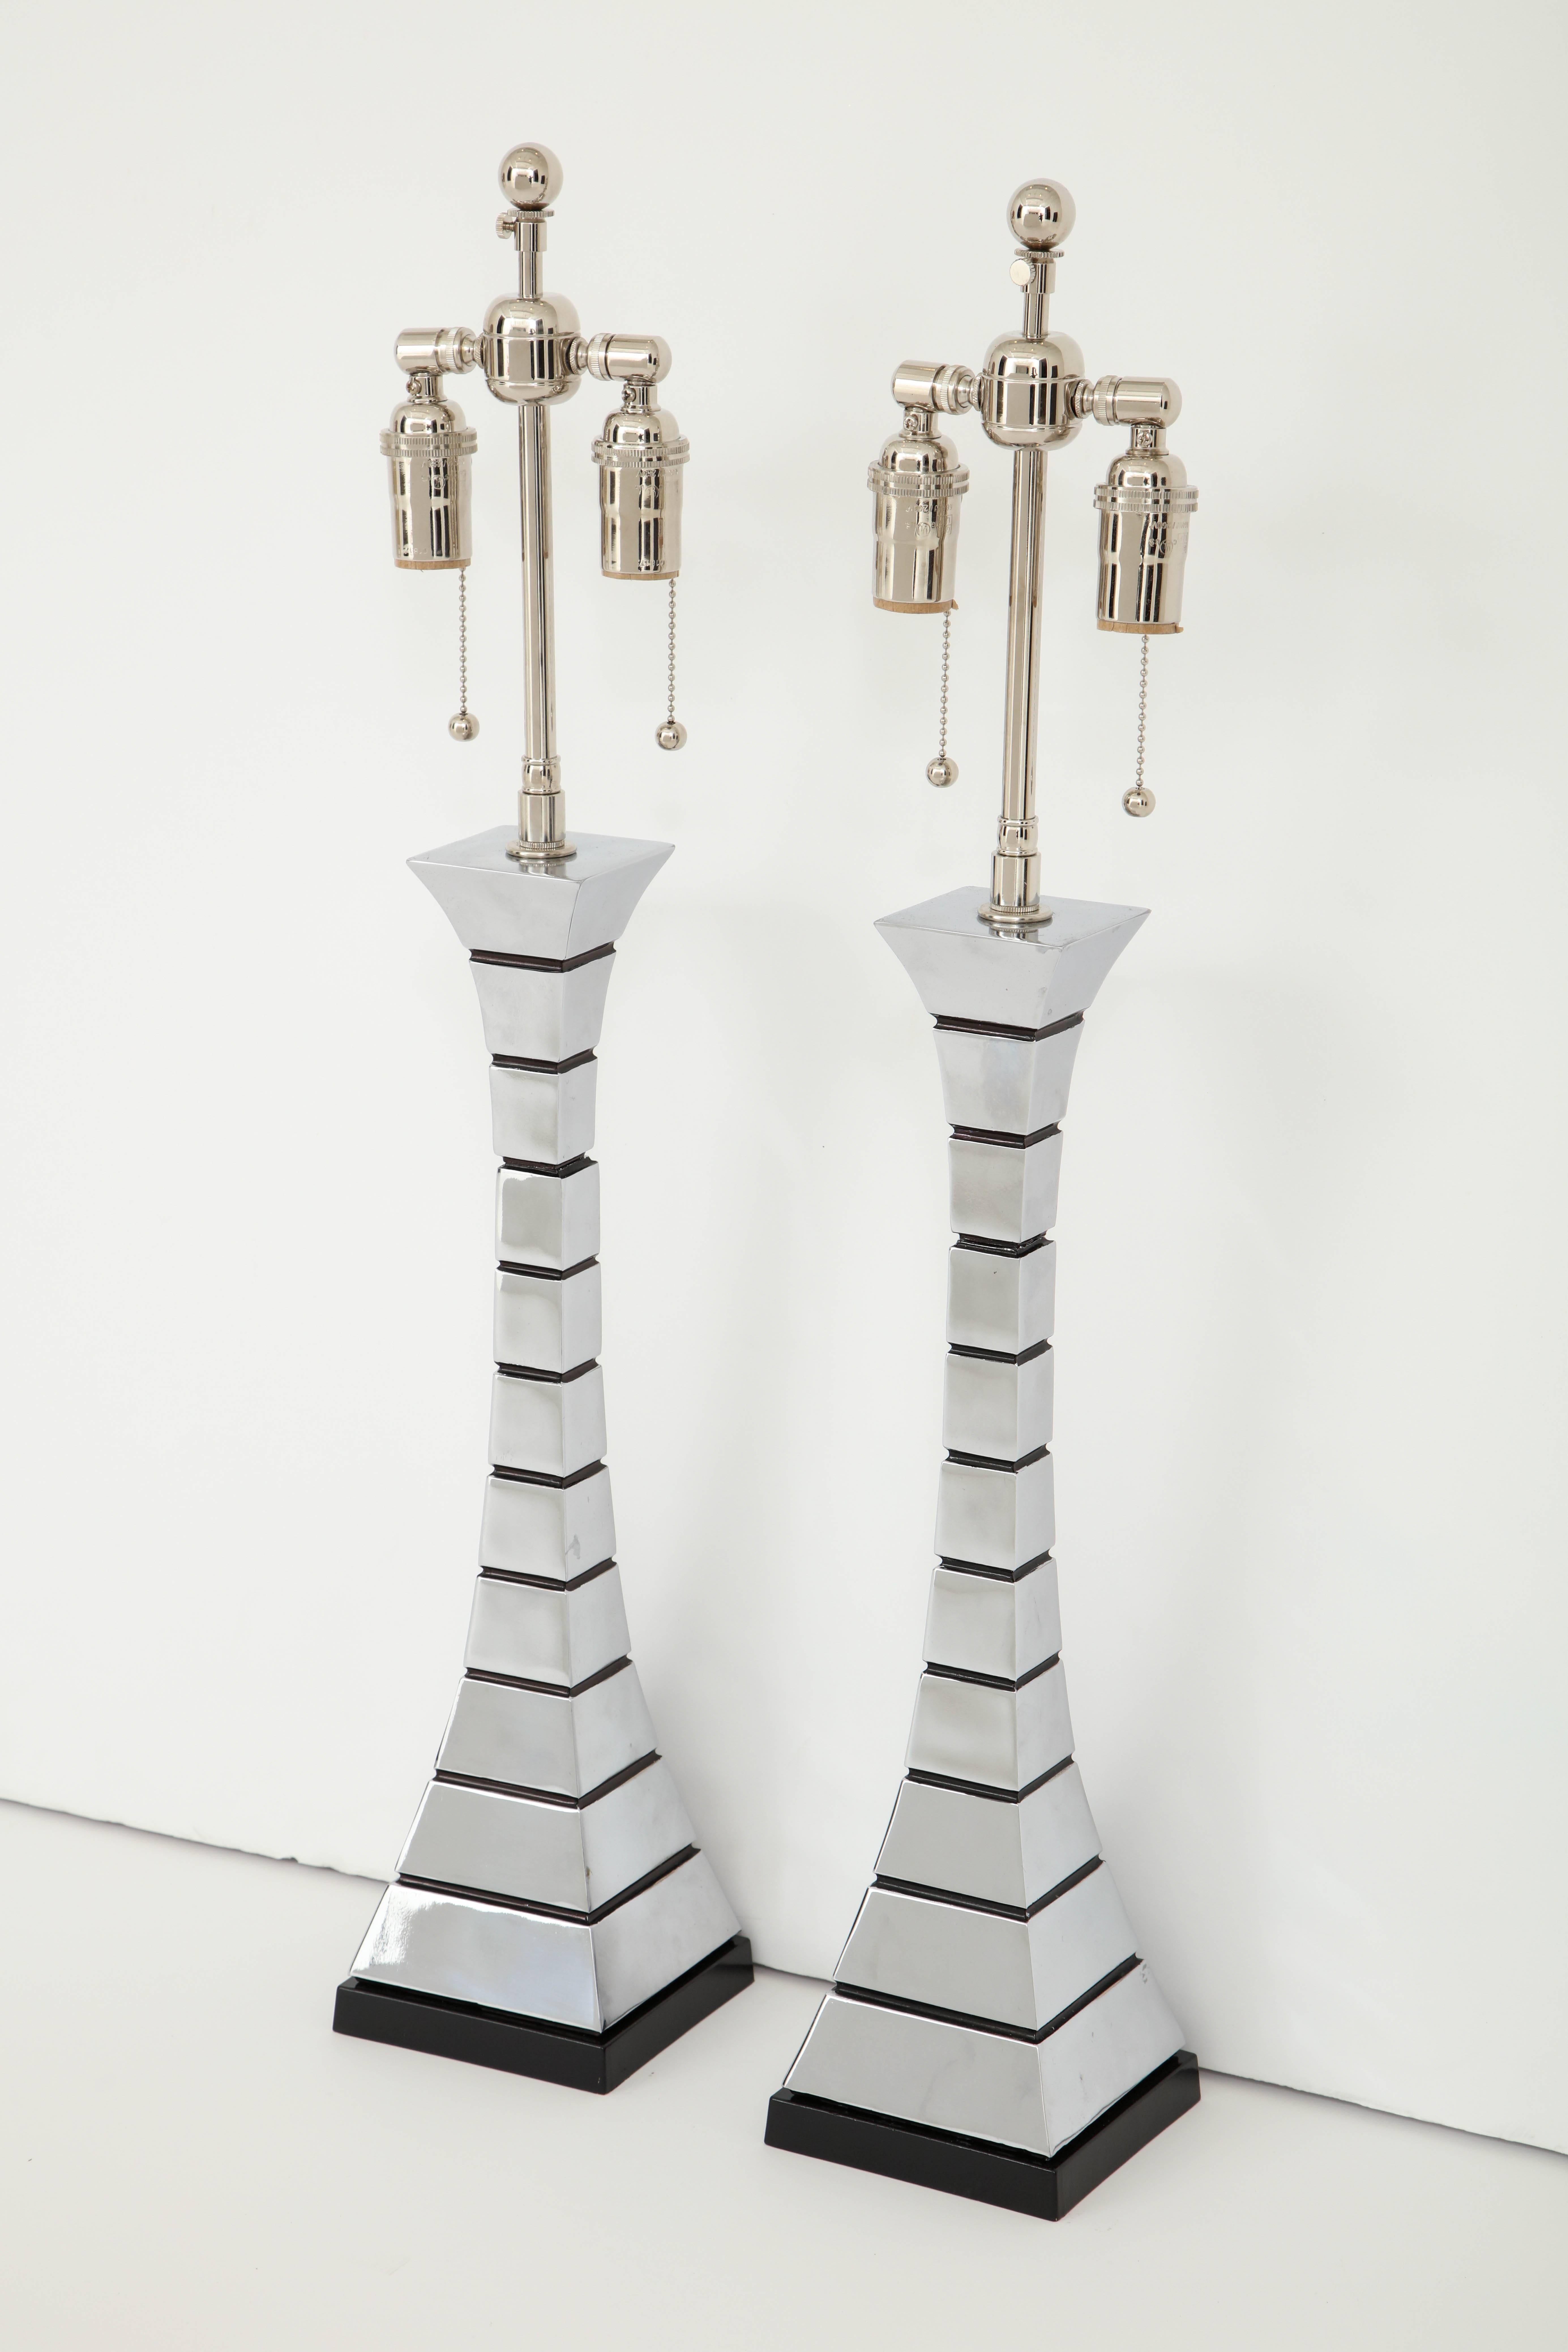 Pair of 1970s midcentury polished chrome lamps.
The lamps have a wonderful Eiffel Tower feel to them with a subtle hour glass shape which is alternated by painted black horizontal channels.
The lamps have been newly rewired for the US with